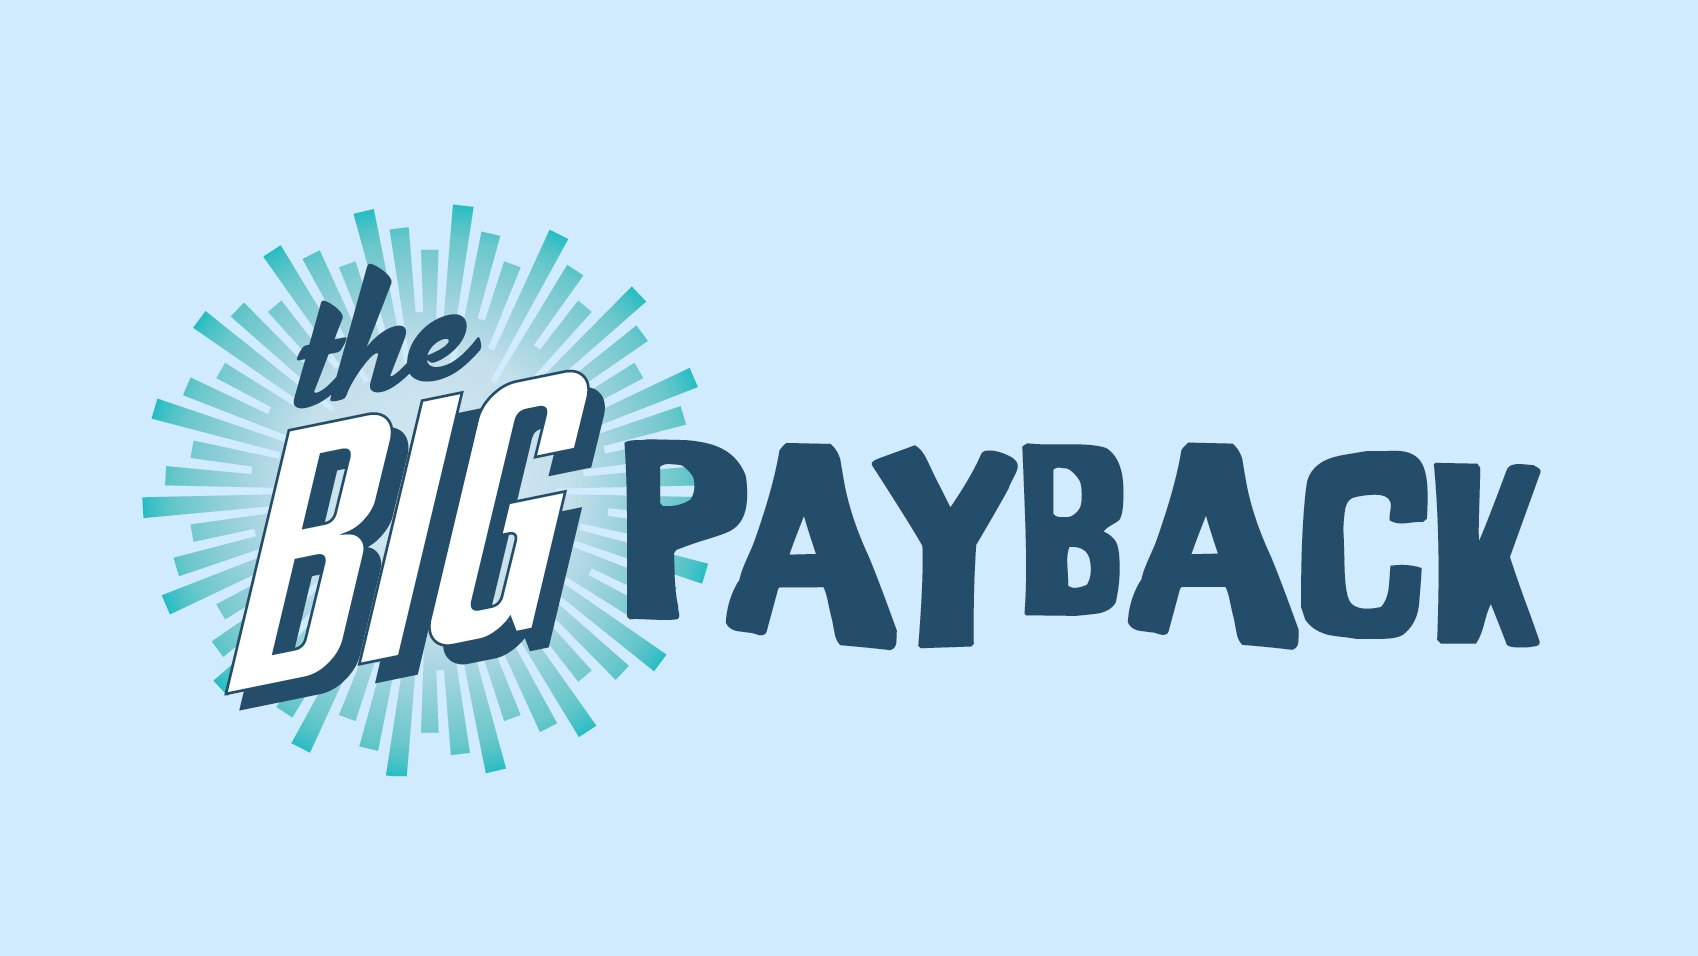 Please Support CPN During the 2021 Big Payback on May 5th